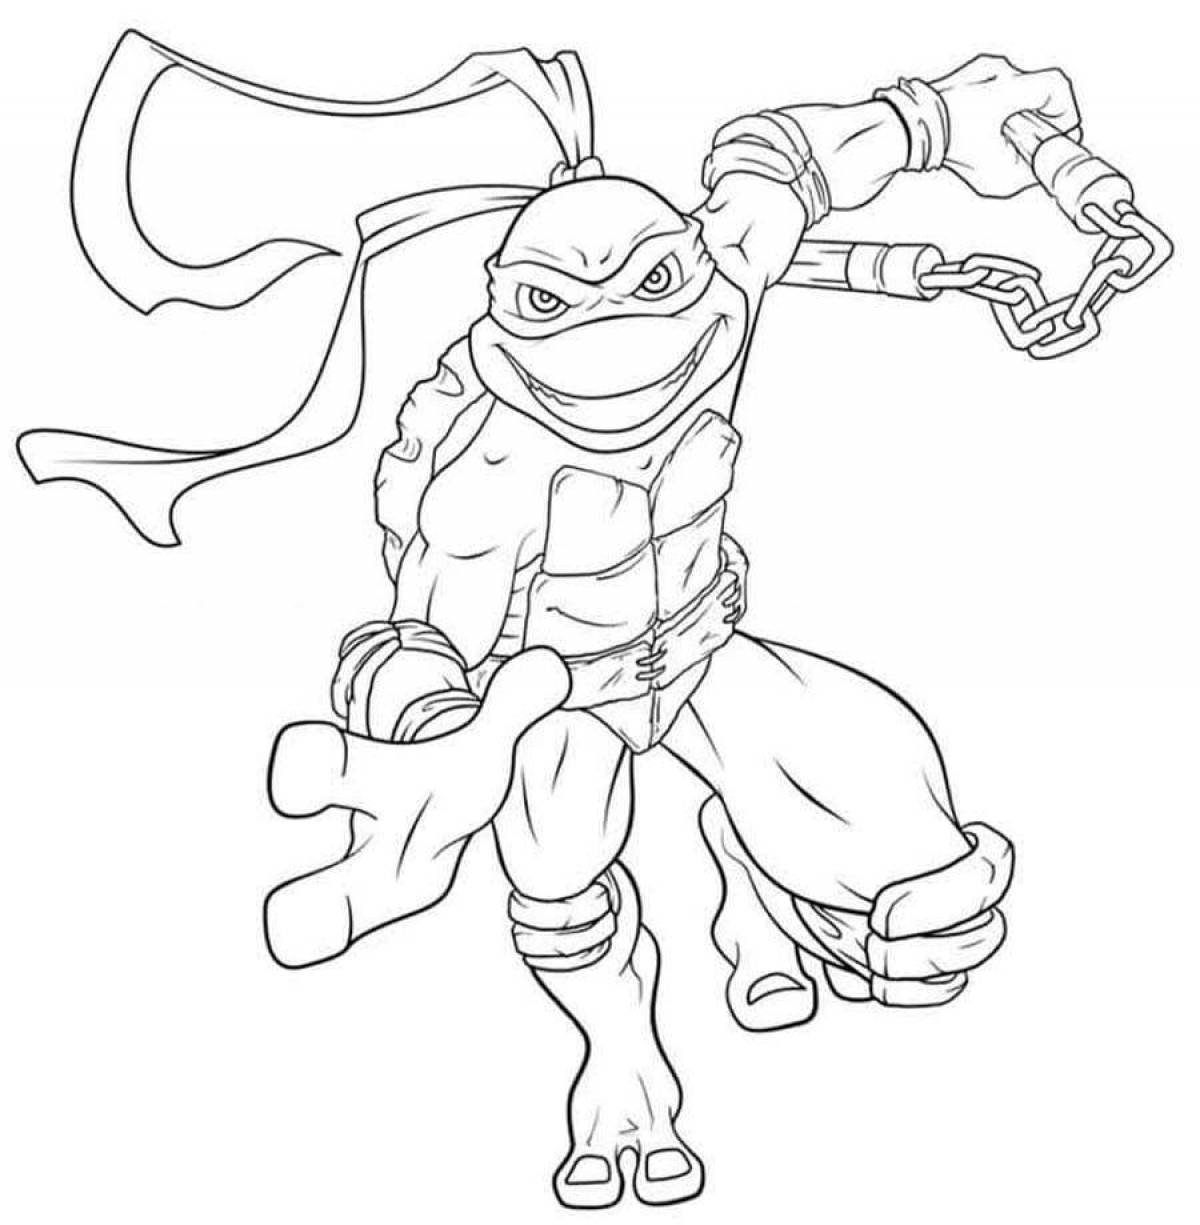 Animated ninja turtles coloring pages for boys